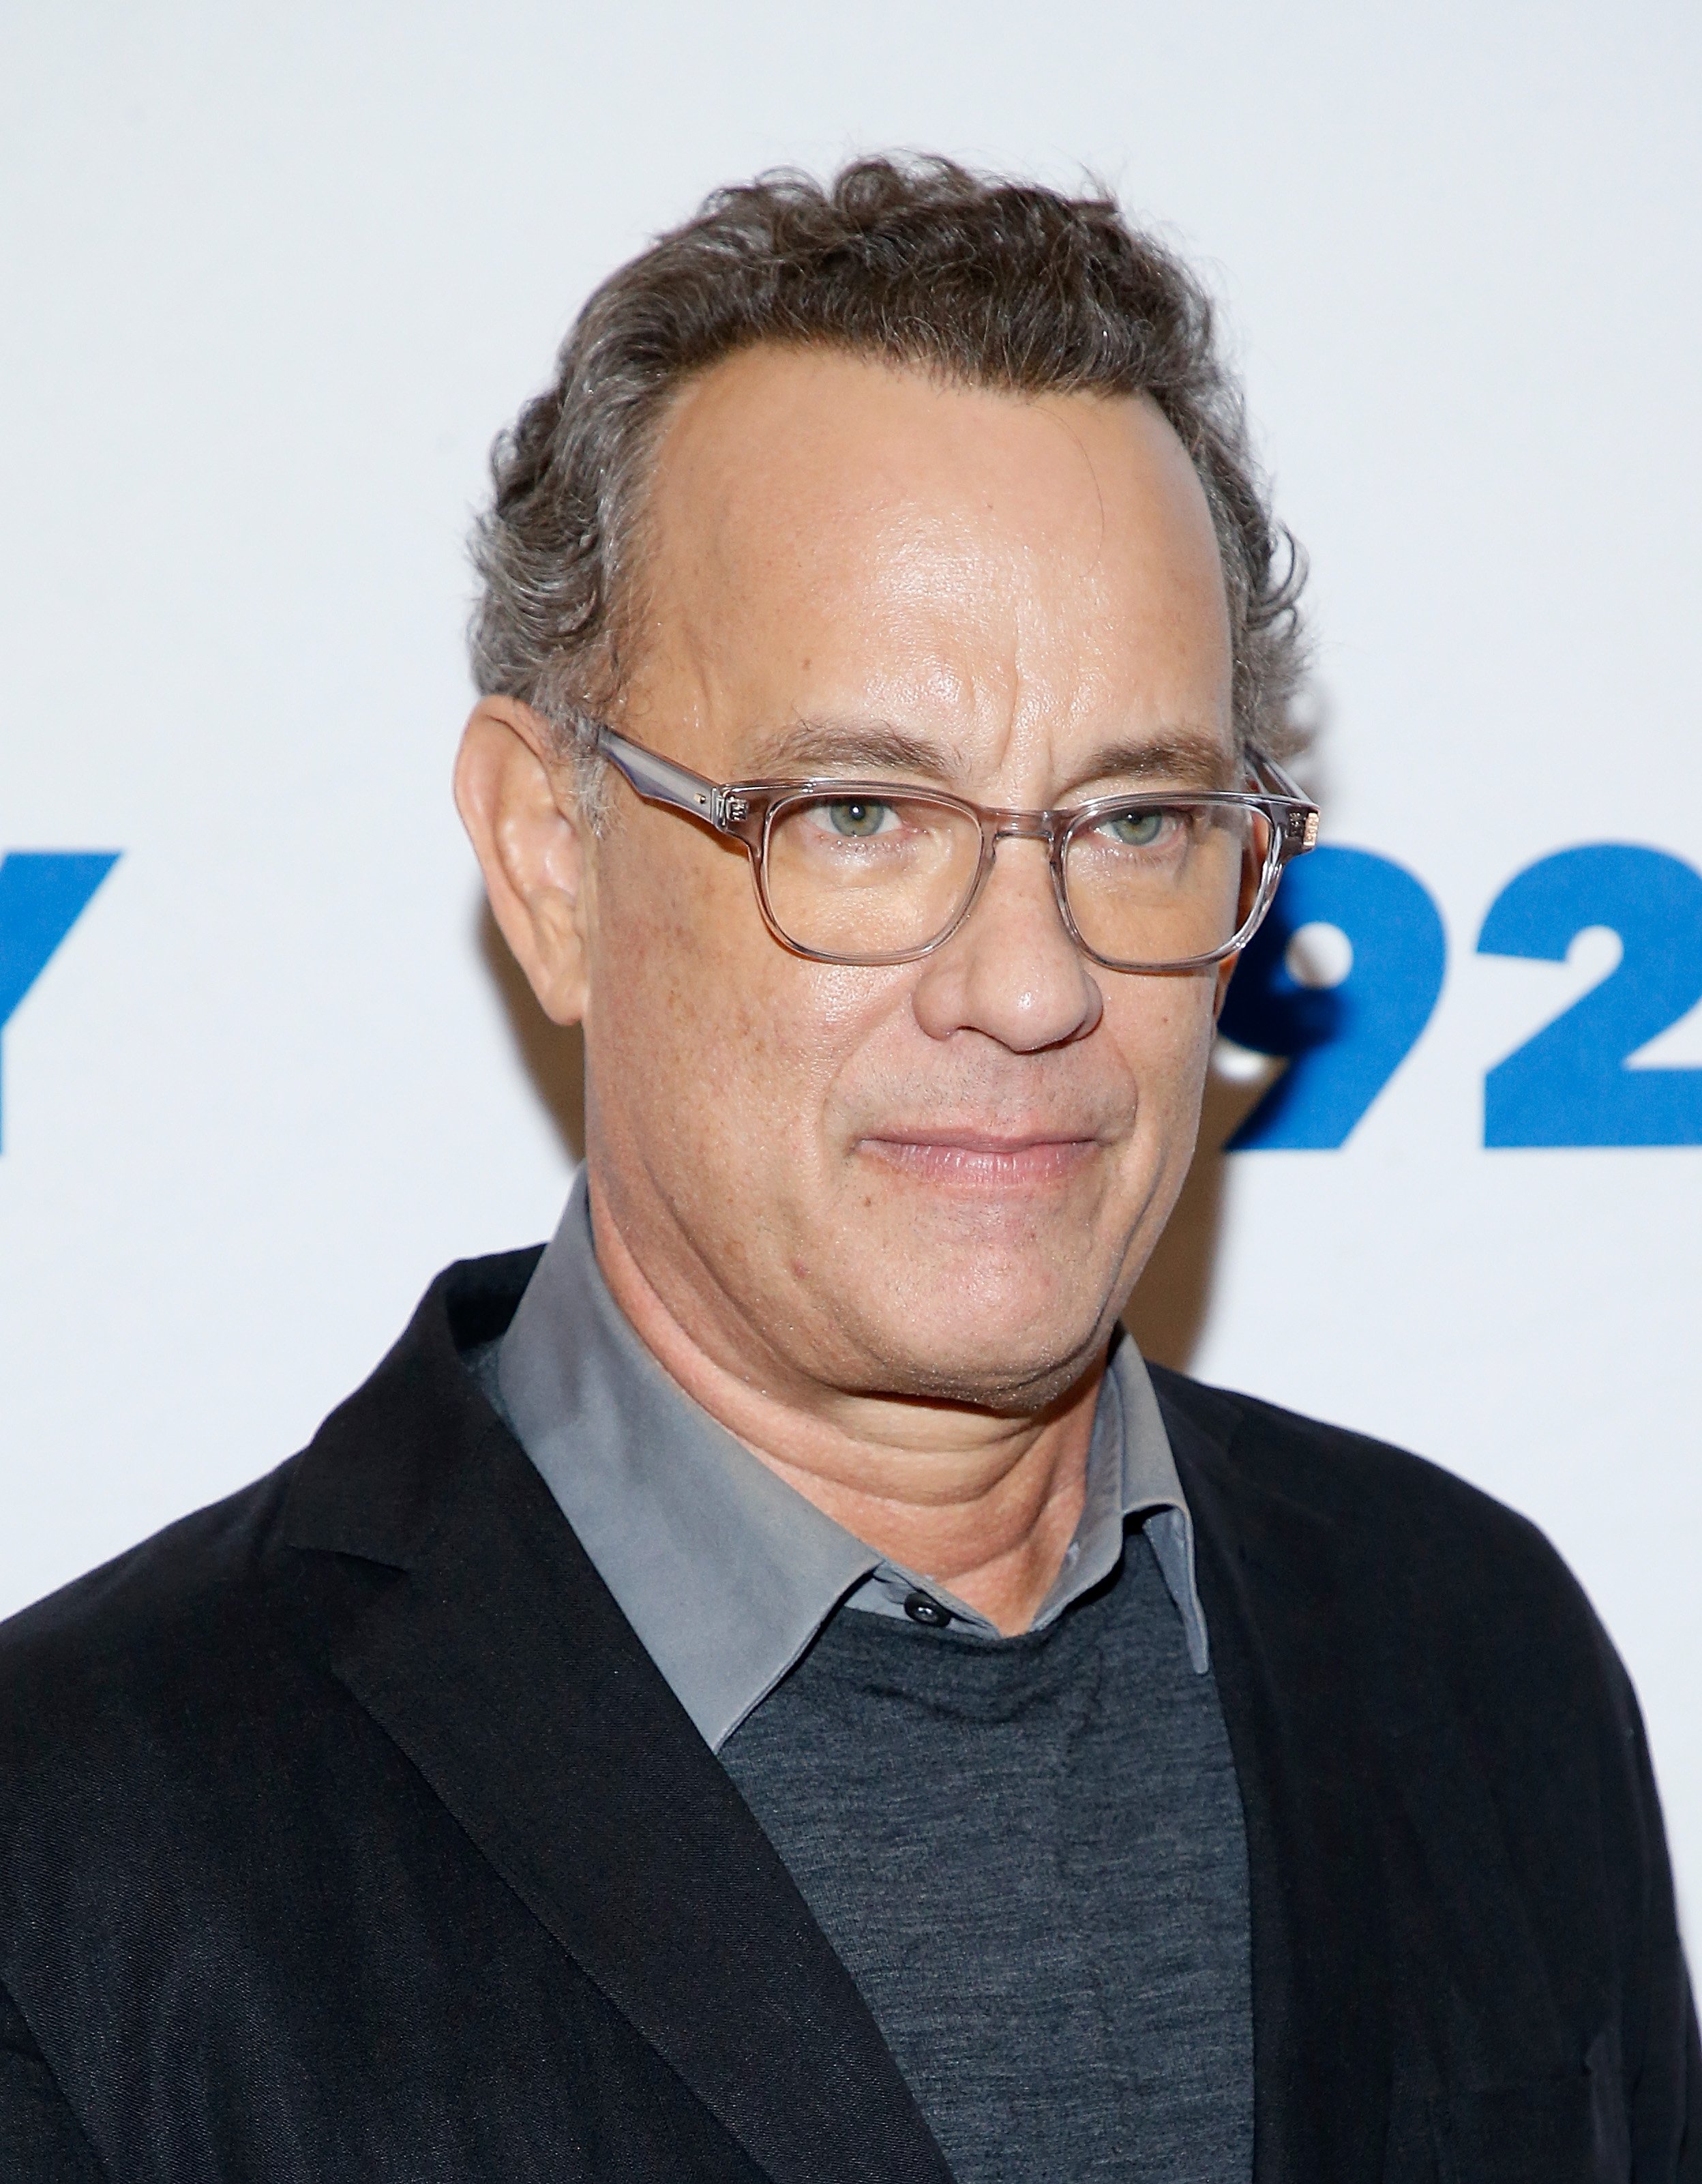 Tom Hanks poses before a conversation with Gayle King at 92nd Street Y on November 1, 2018, in New York City. | Source: Getty Images.